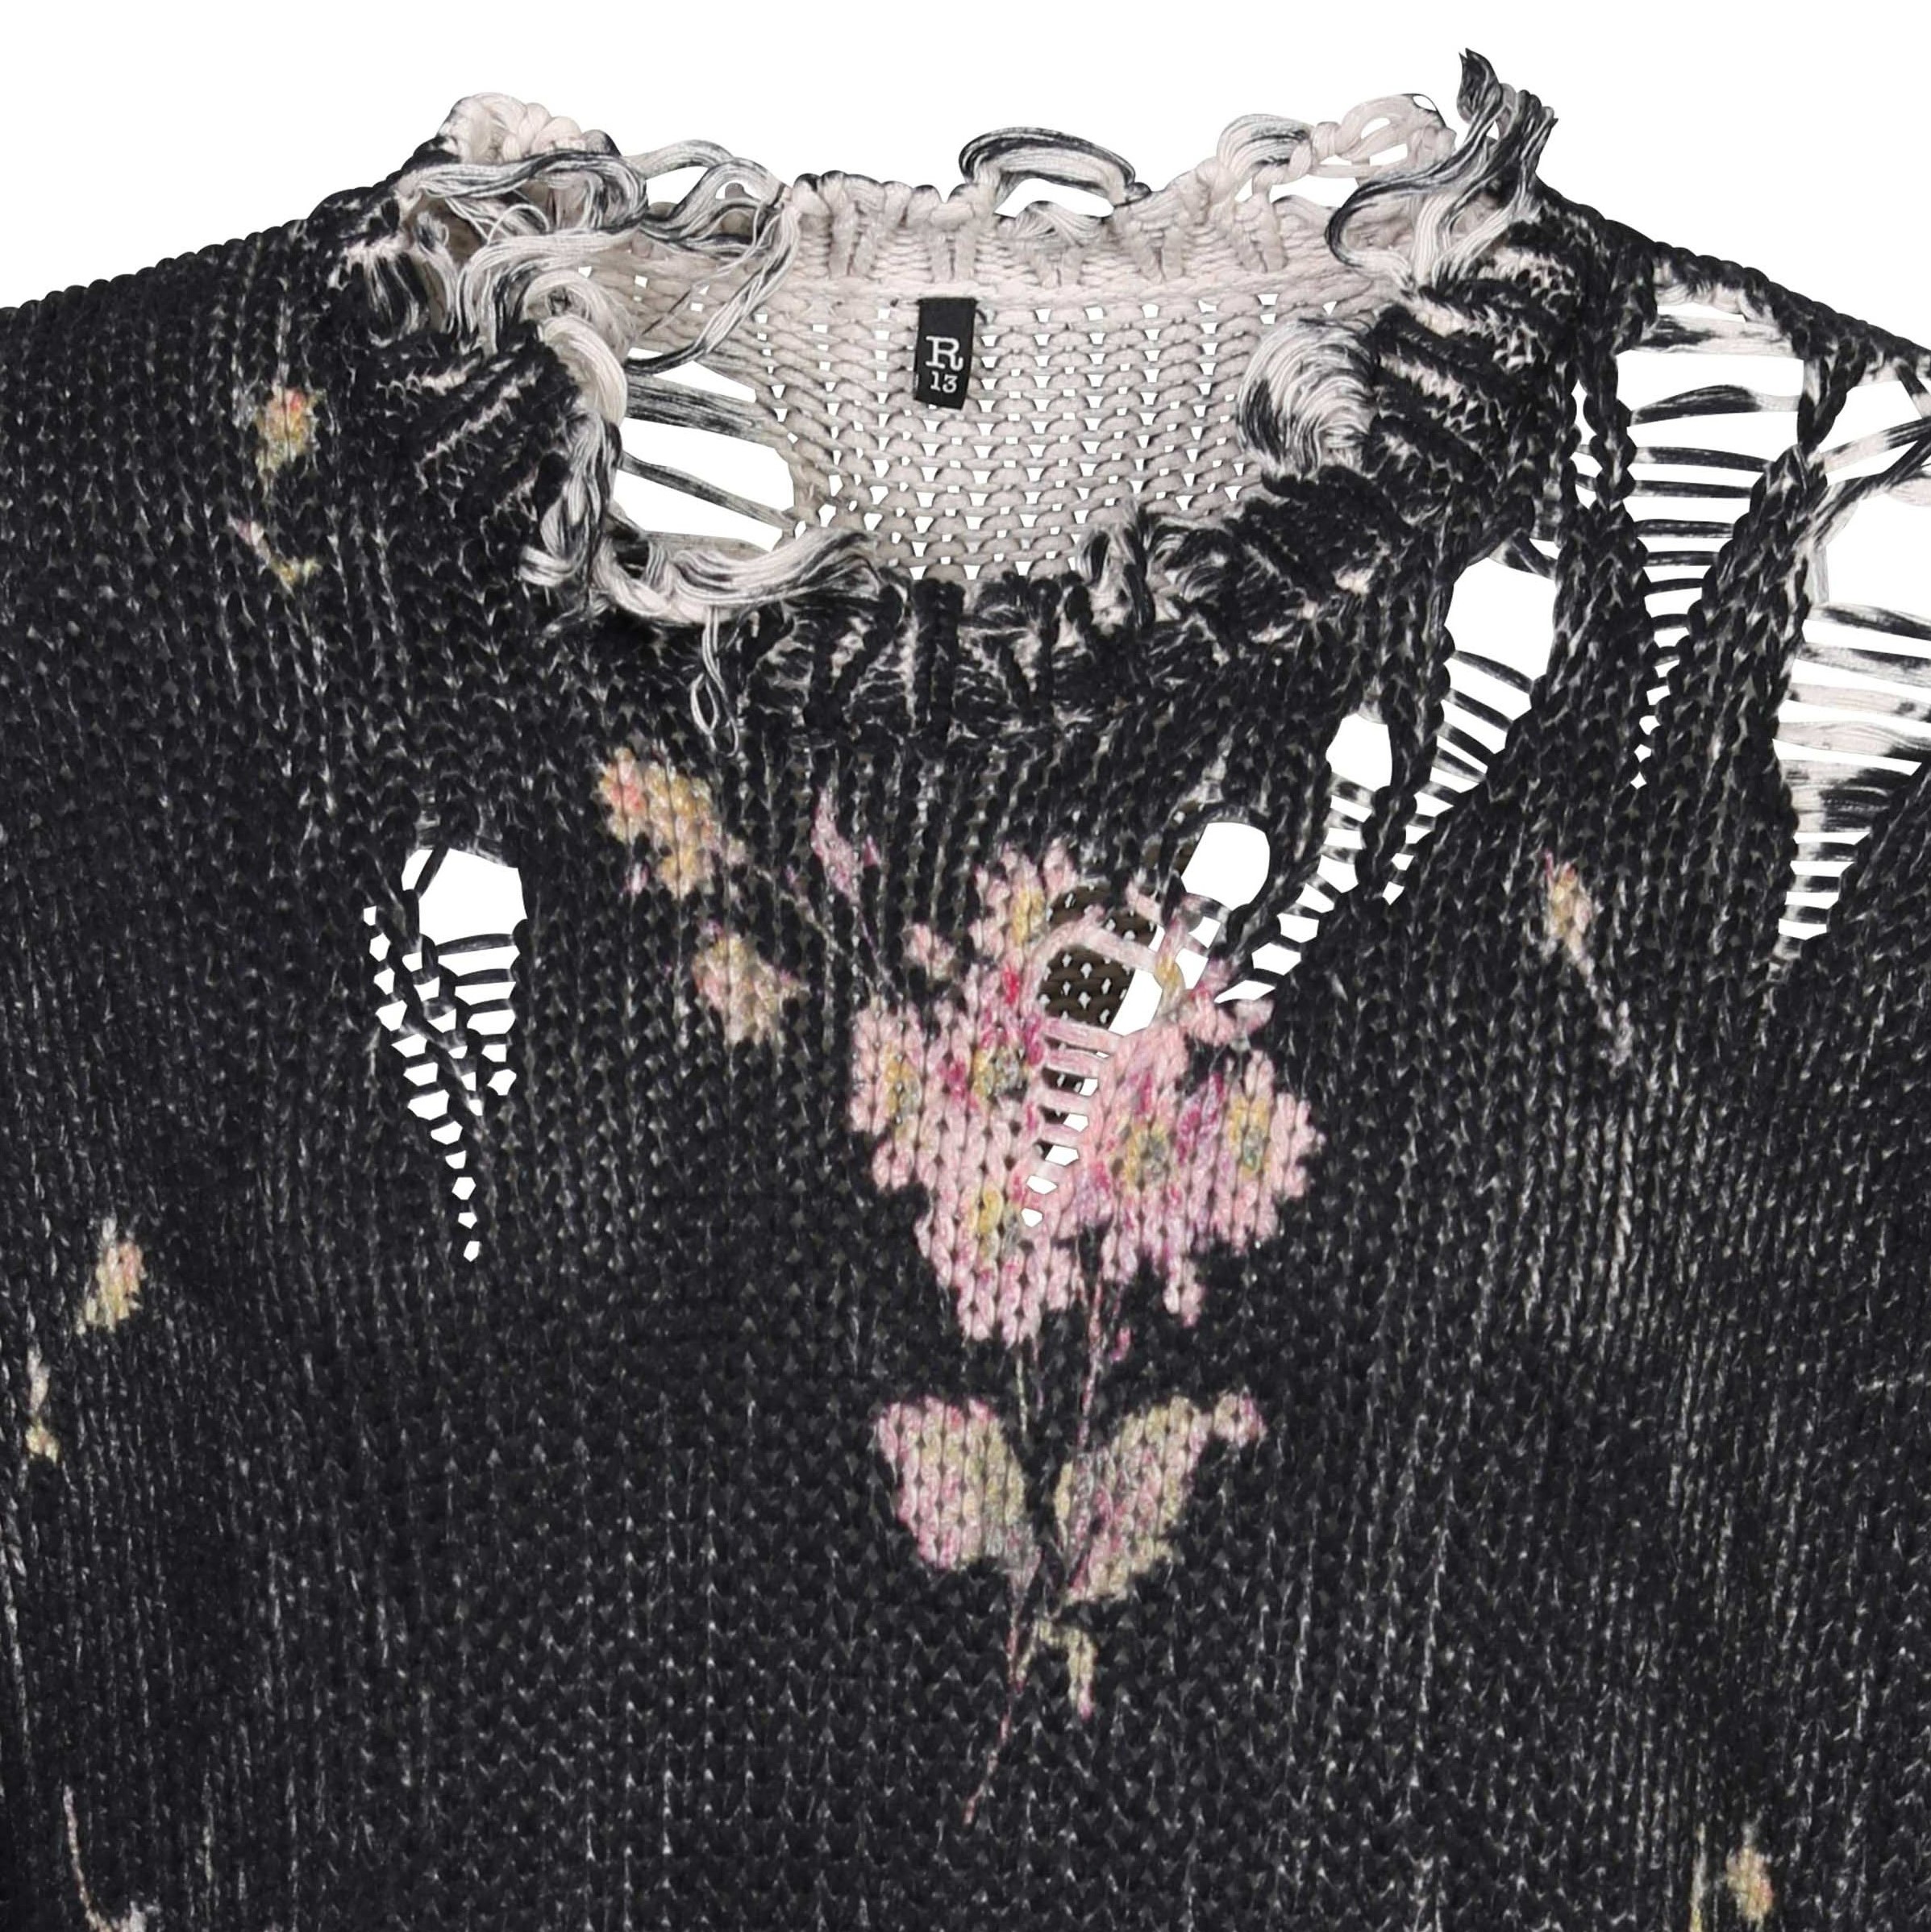 R13 Floral Distressed Knit Sweater Multicolor